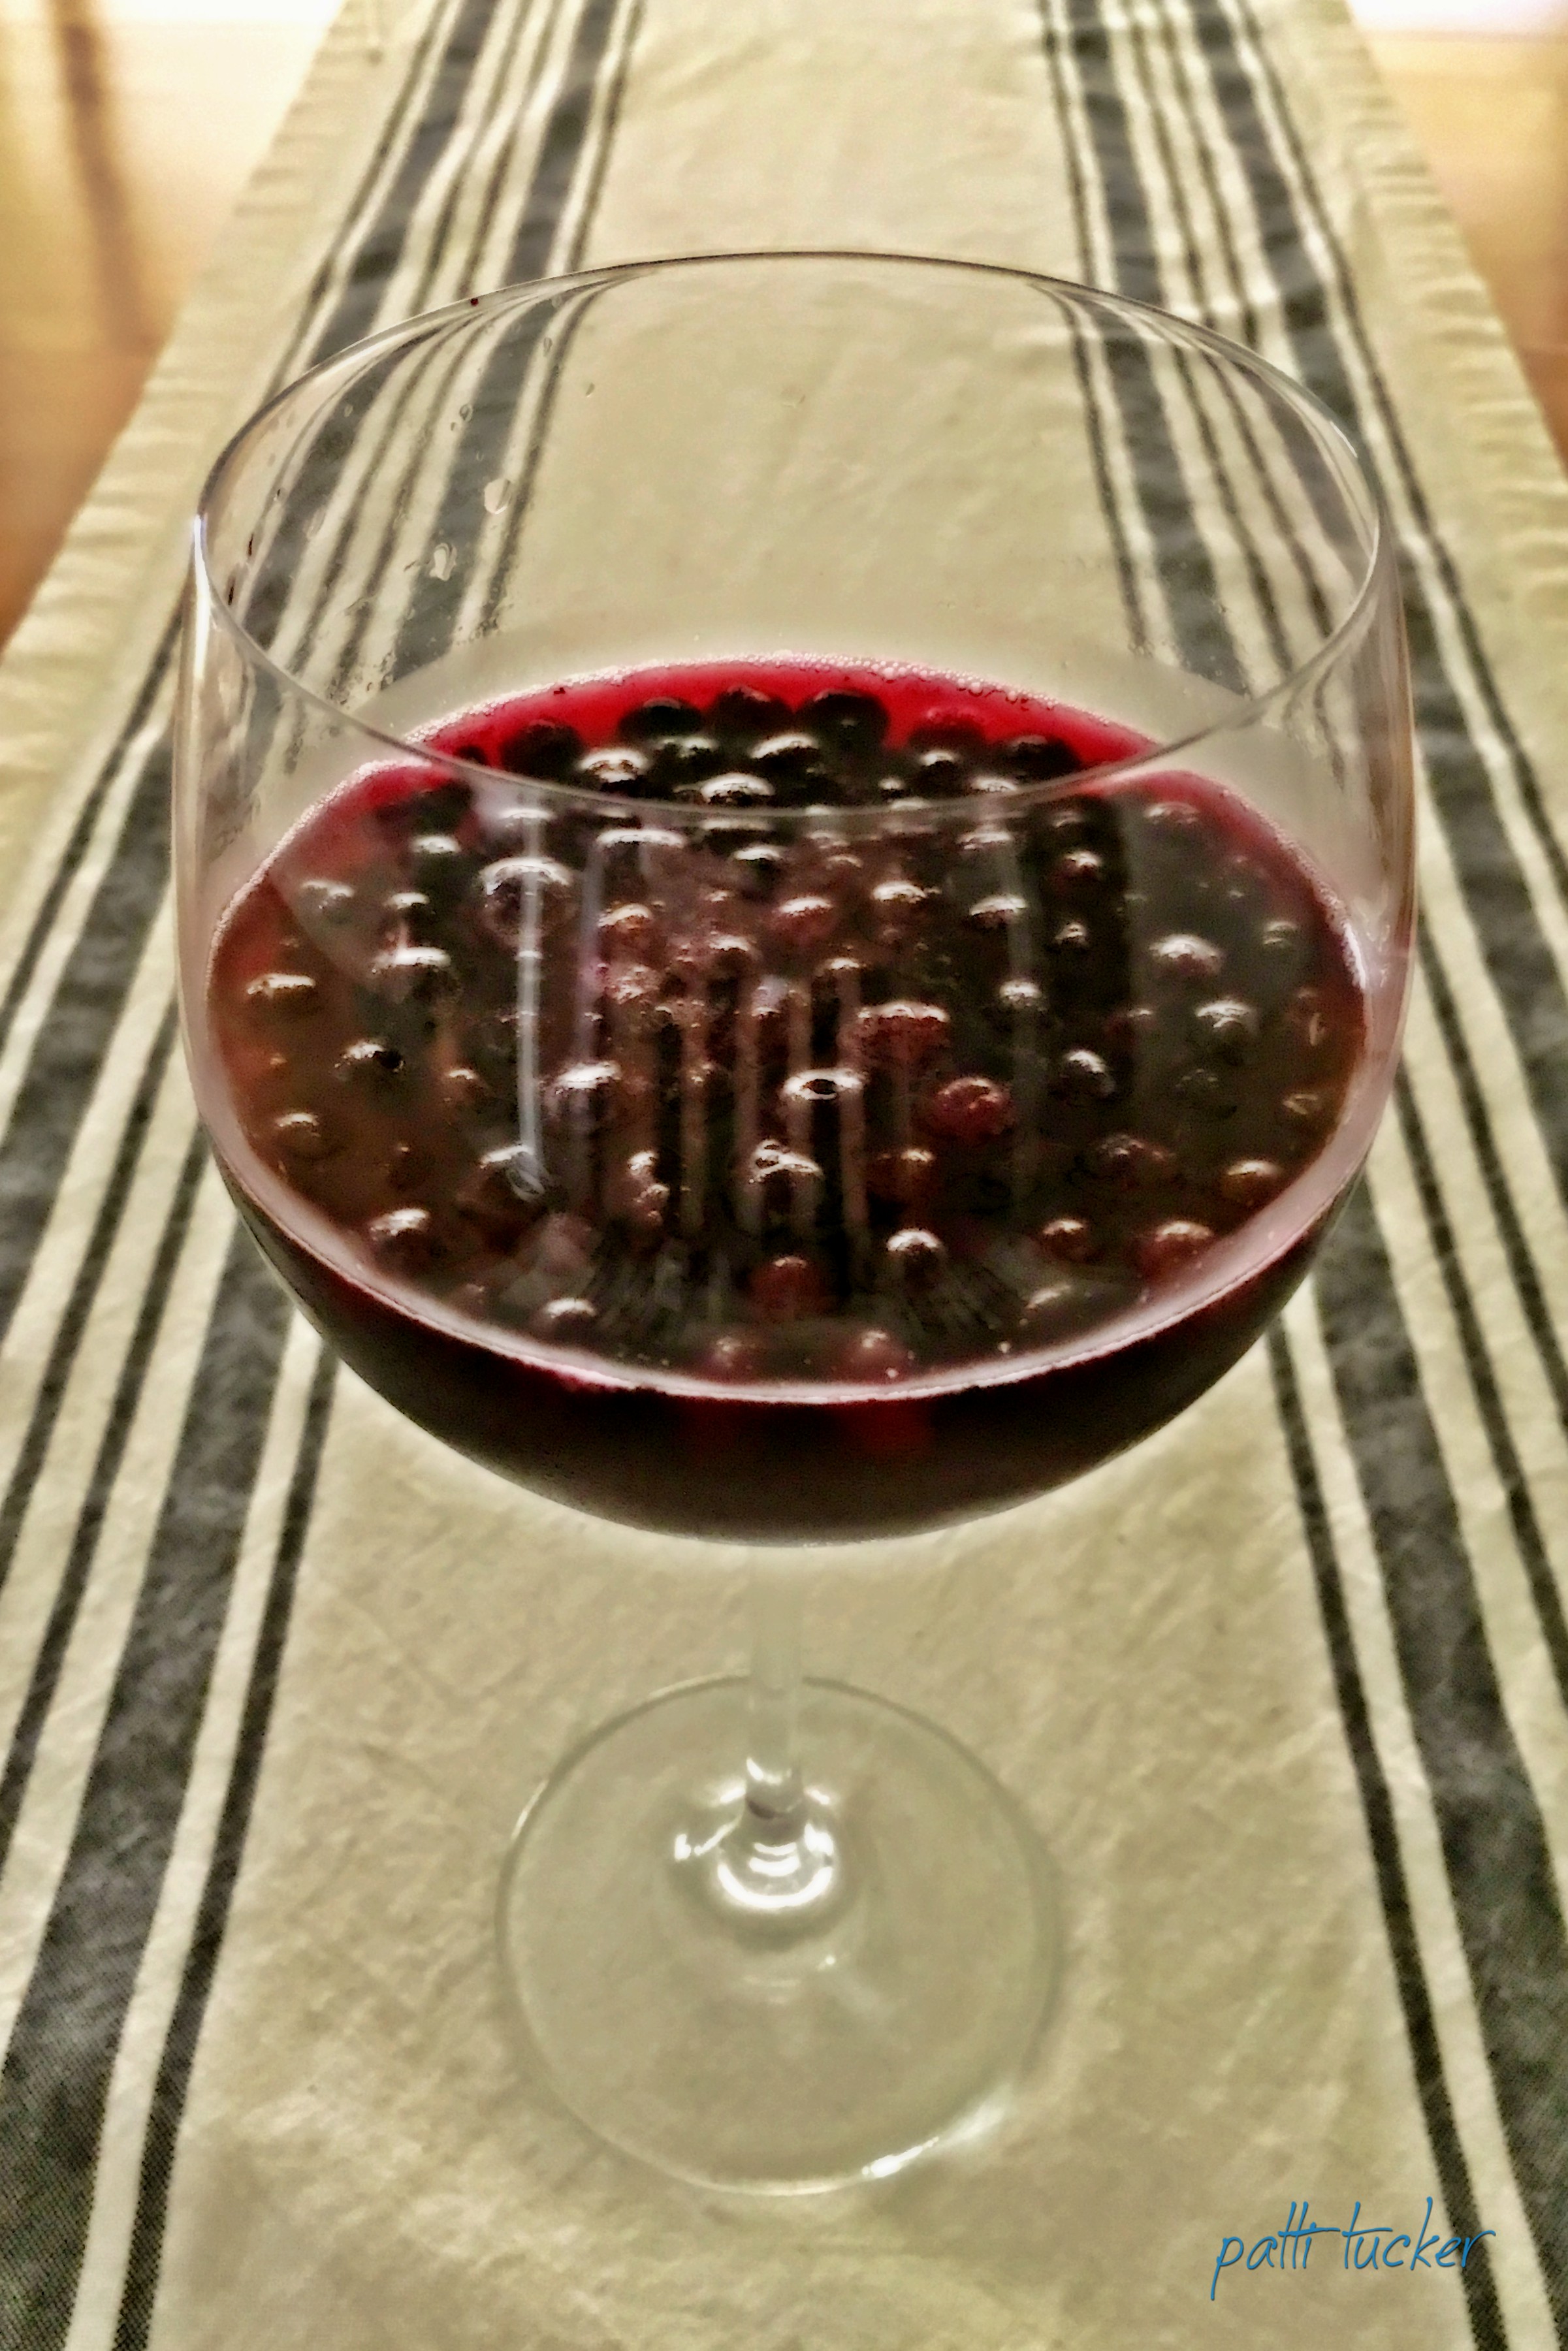 wine glass with wine and blueberries in it on a table